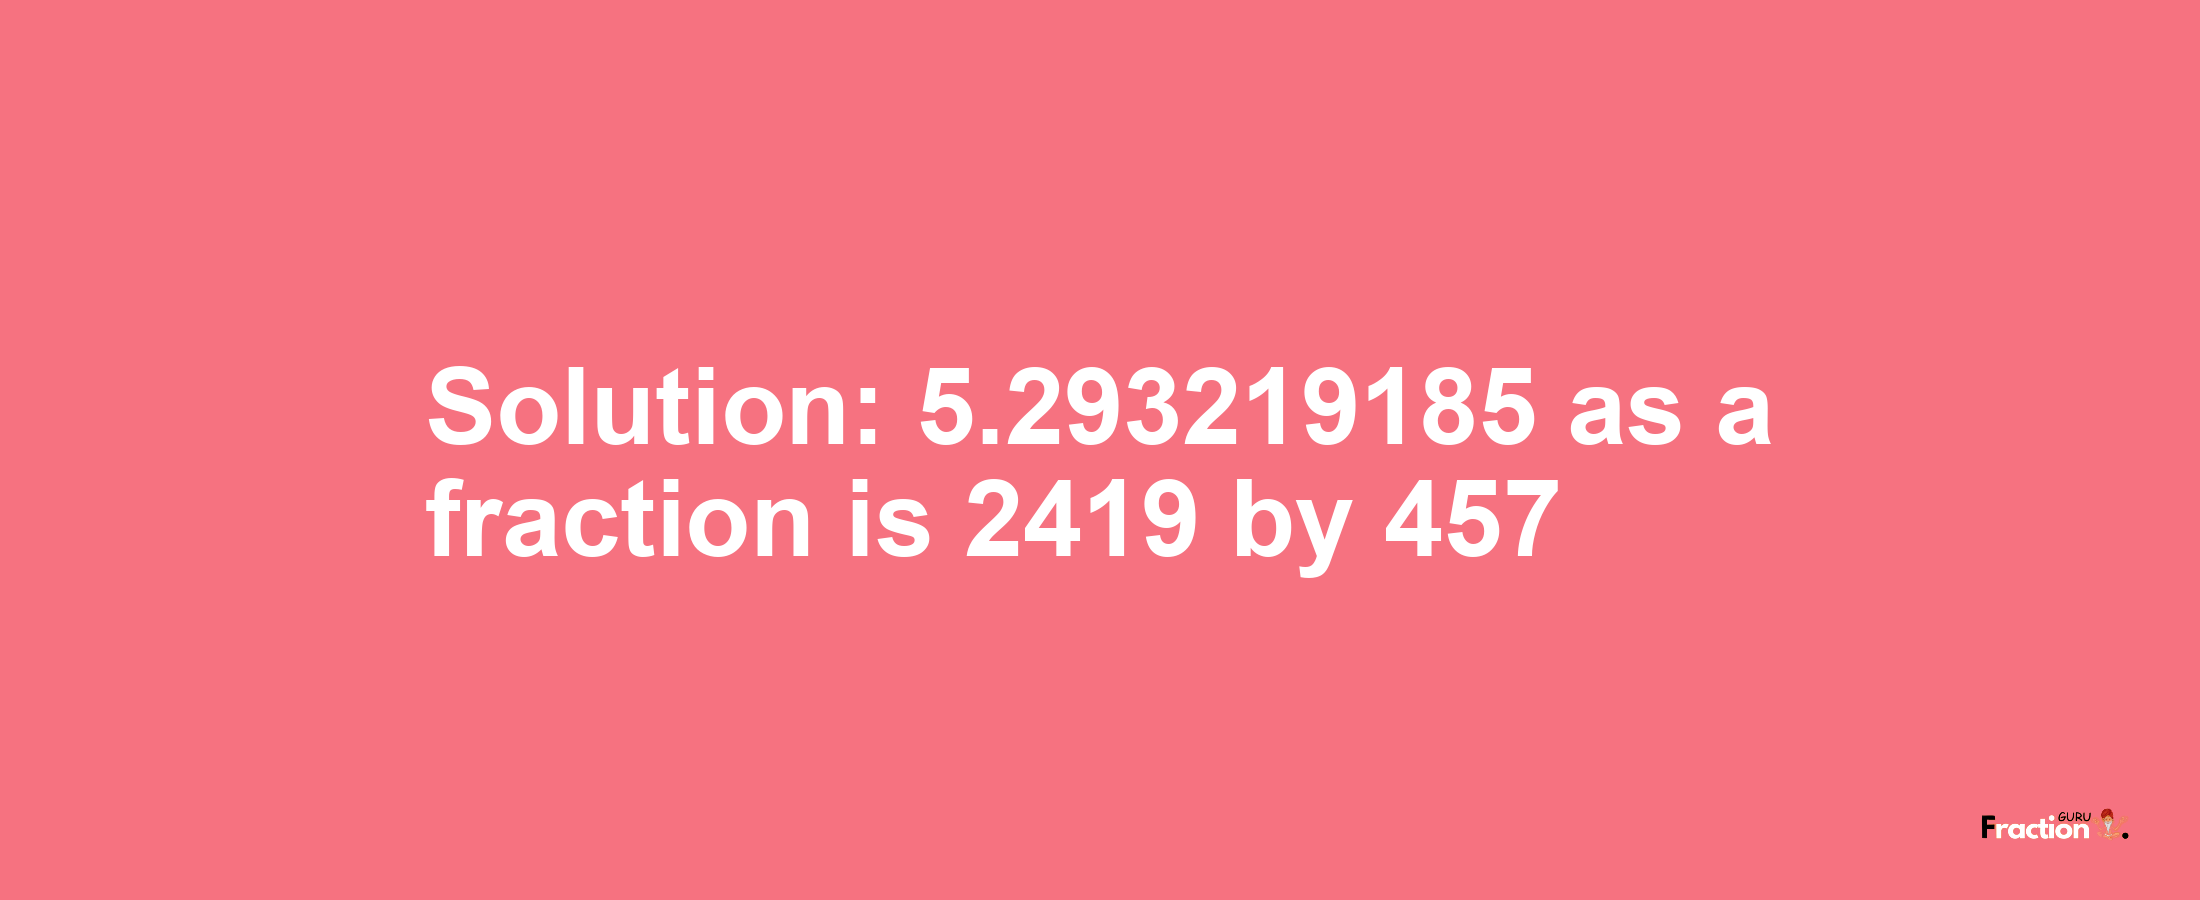 Solution:5.293219185 as a fraction is 2419/457